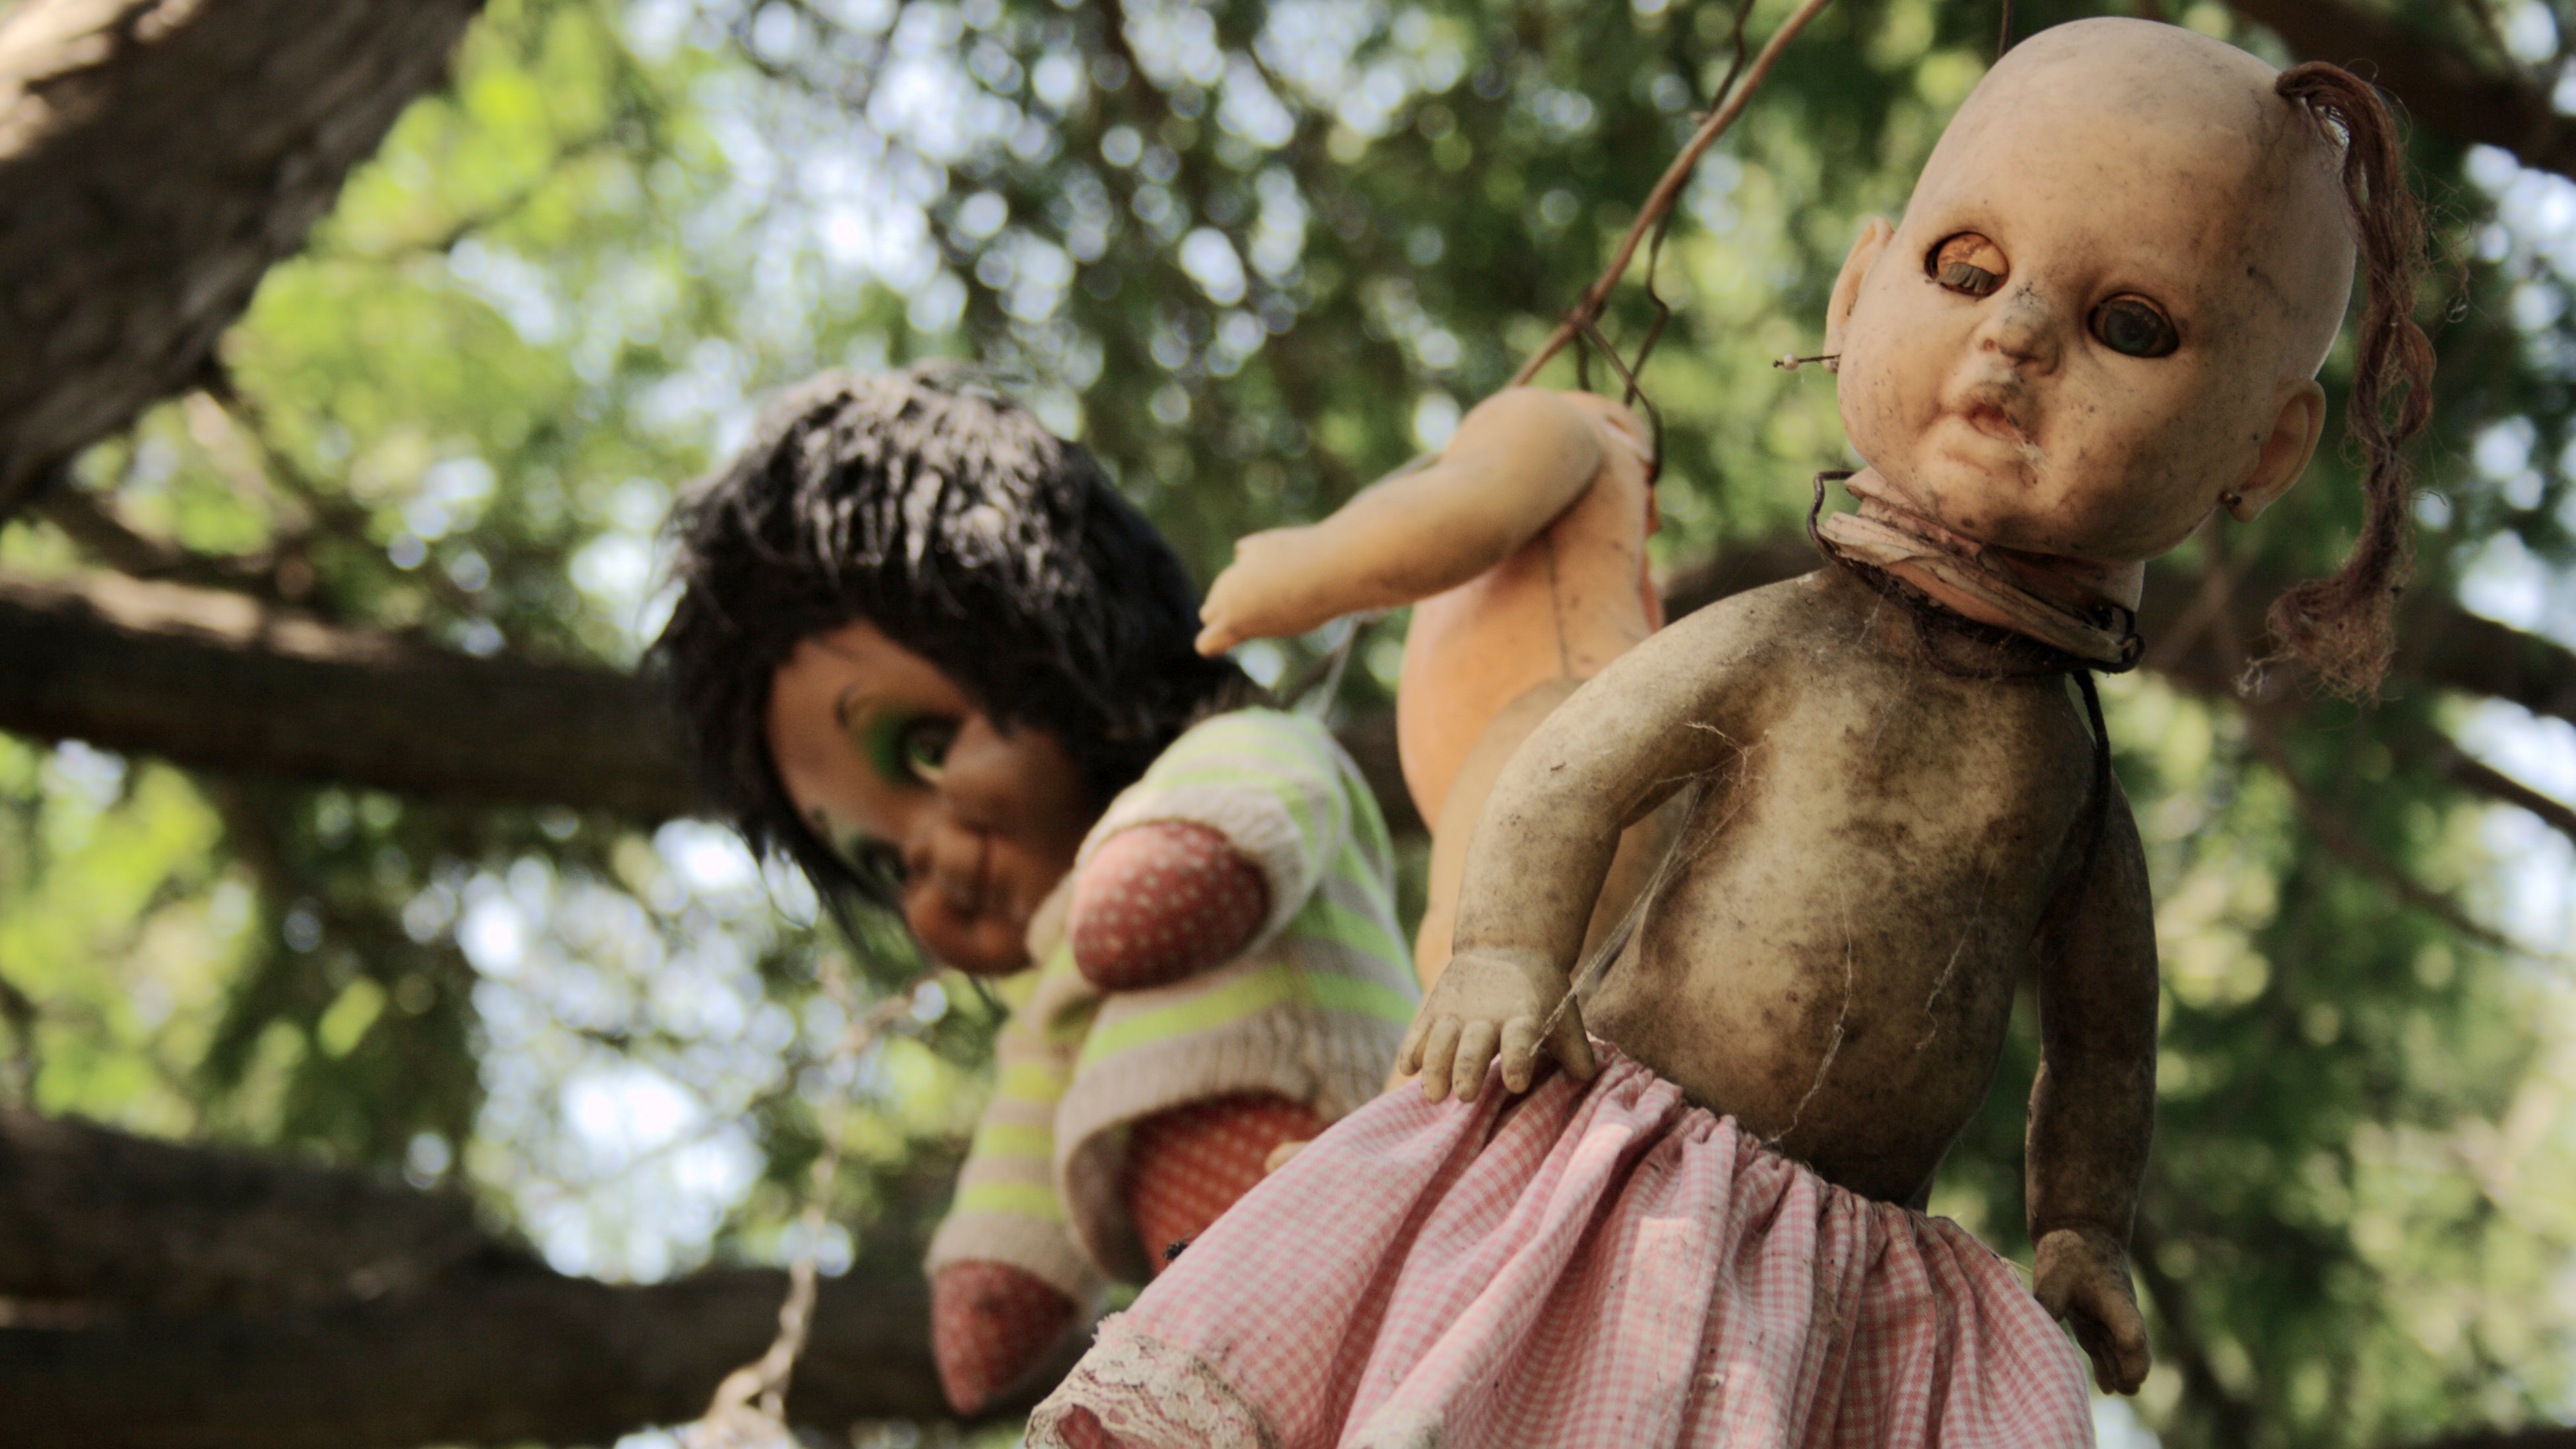 haunted dolls in the world